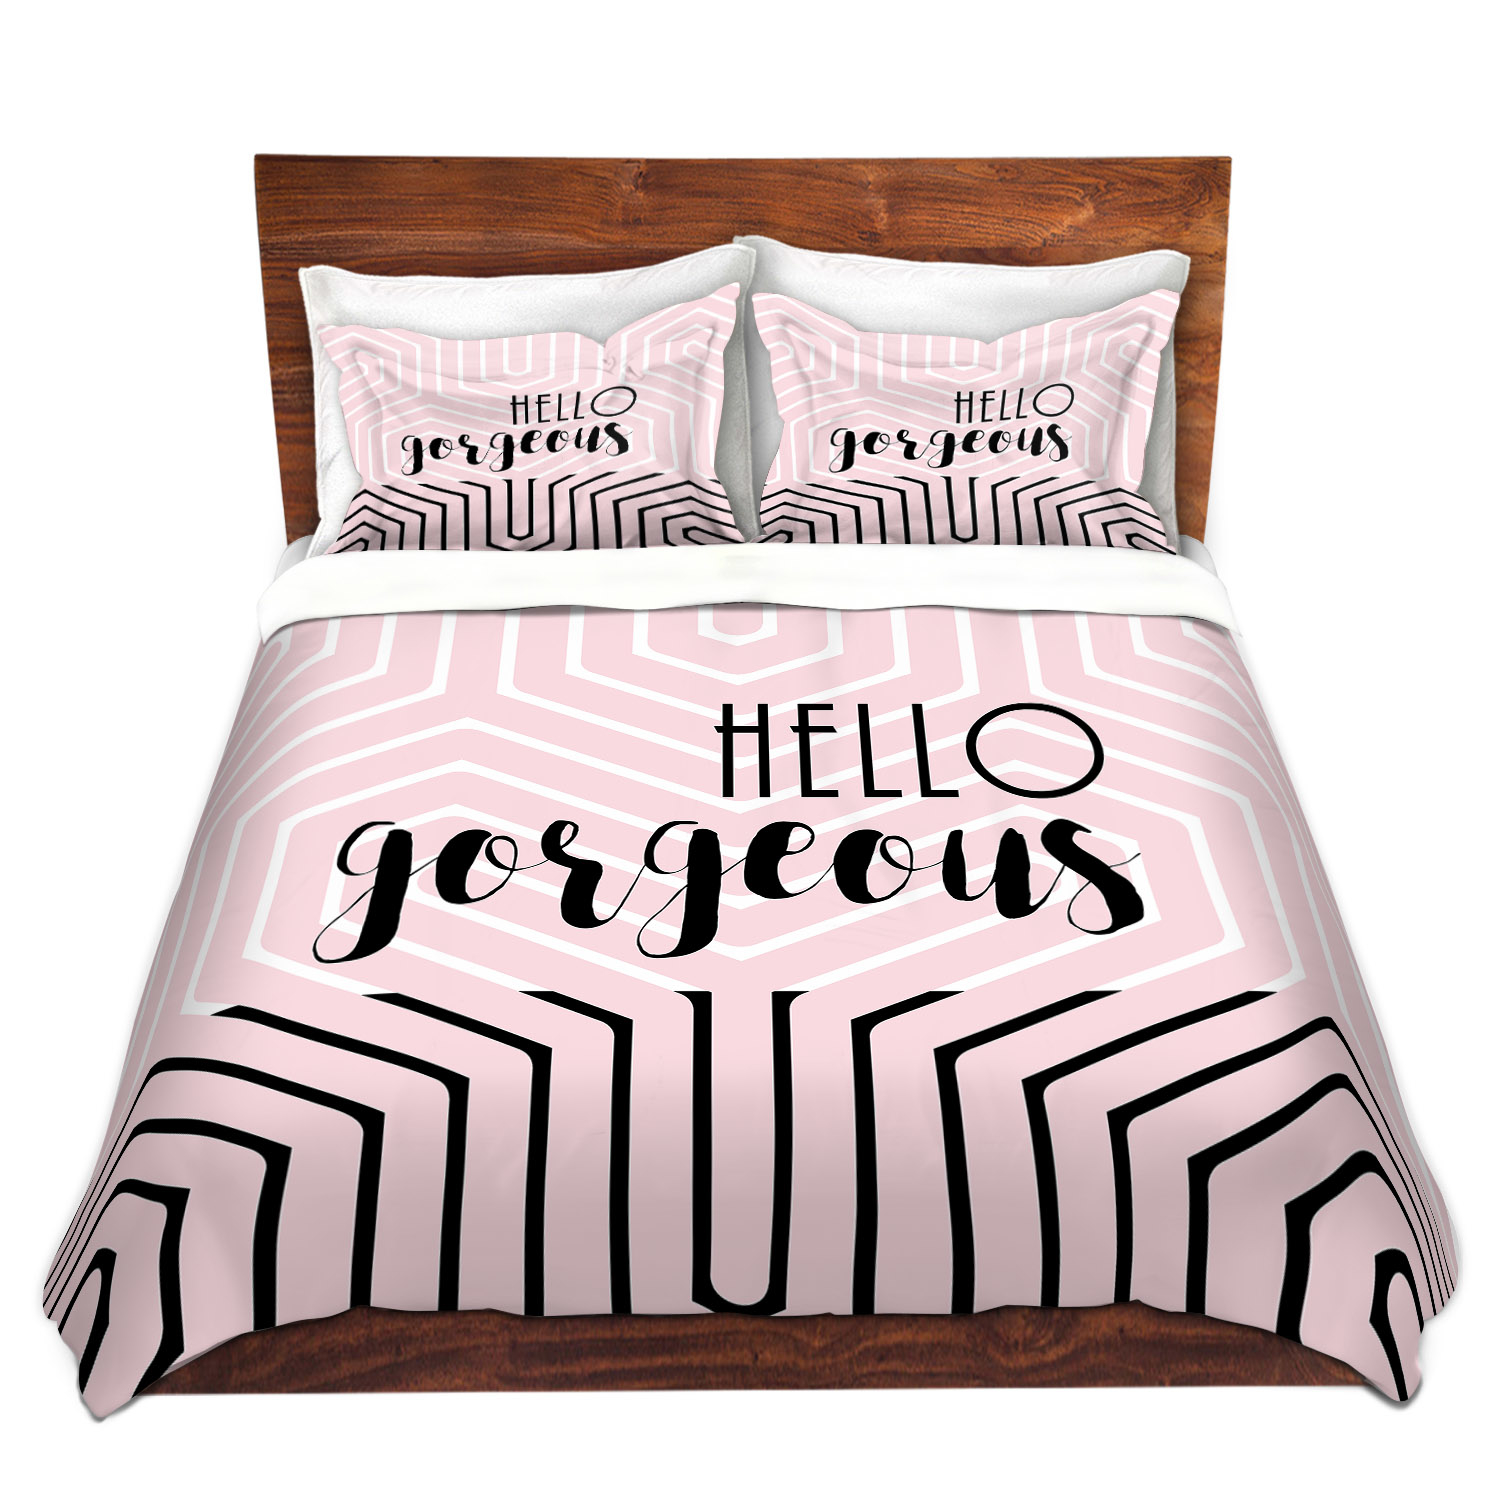 Dianoche Microfiber Duvet Covers By Zara Martina Hello Gorgeous Geo Pattern Pink